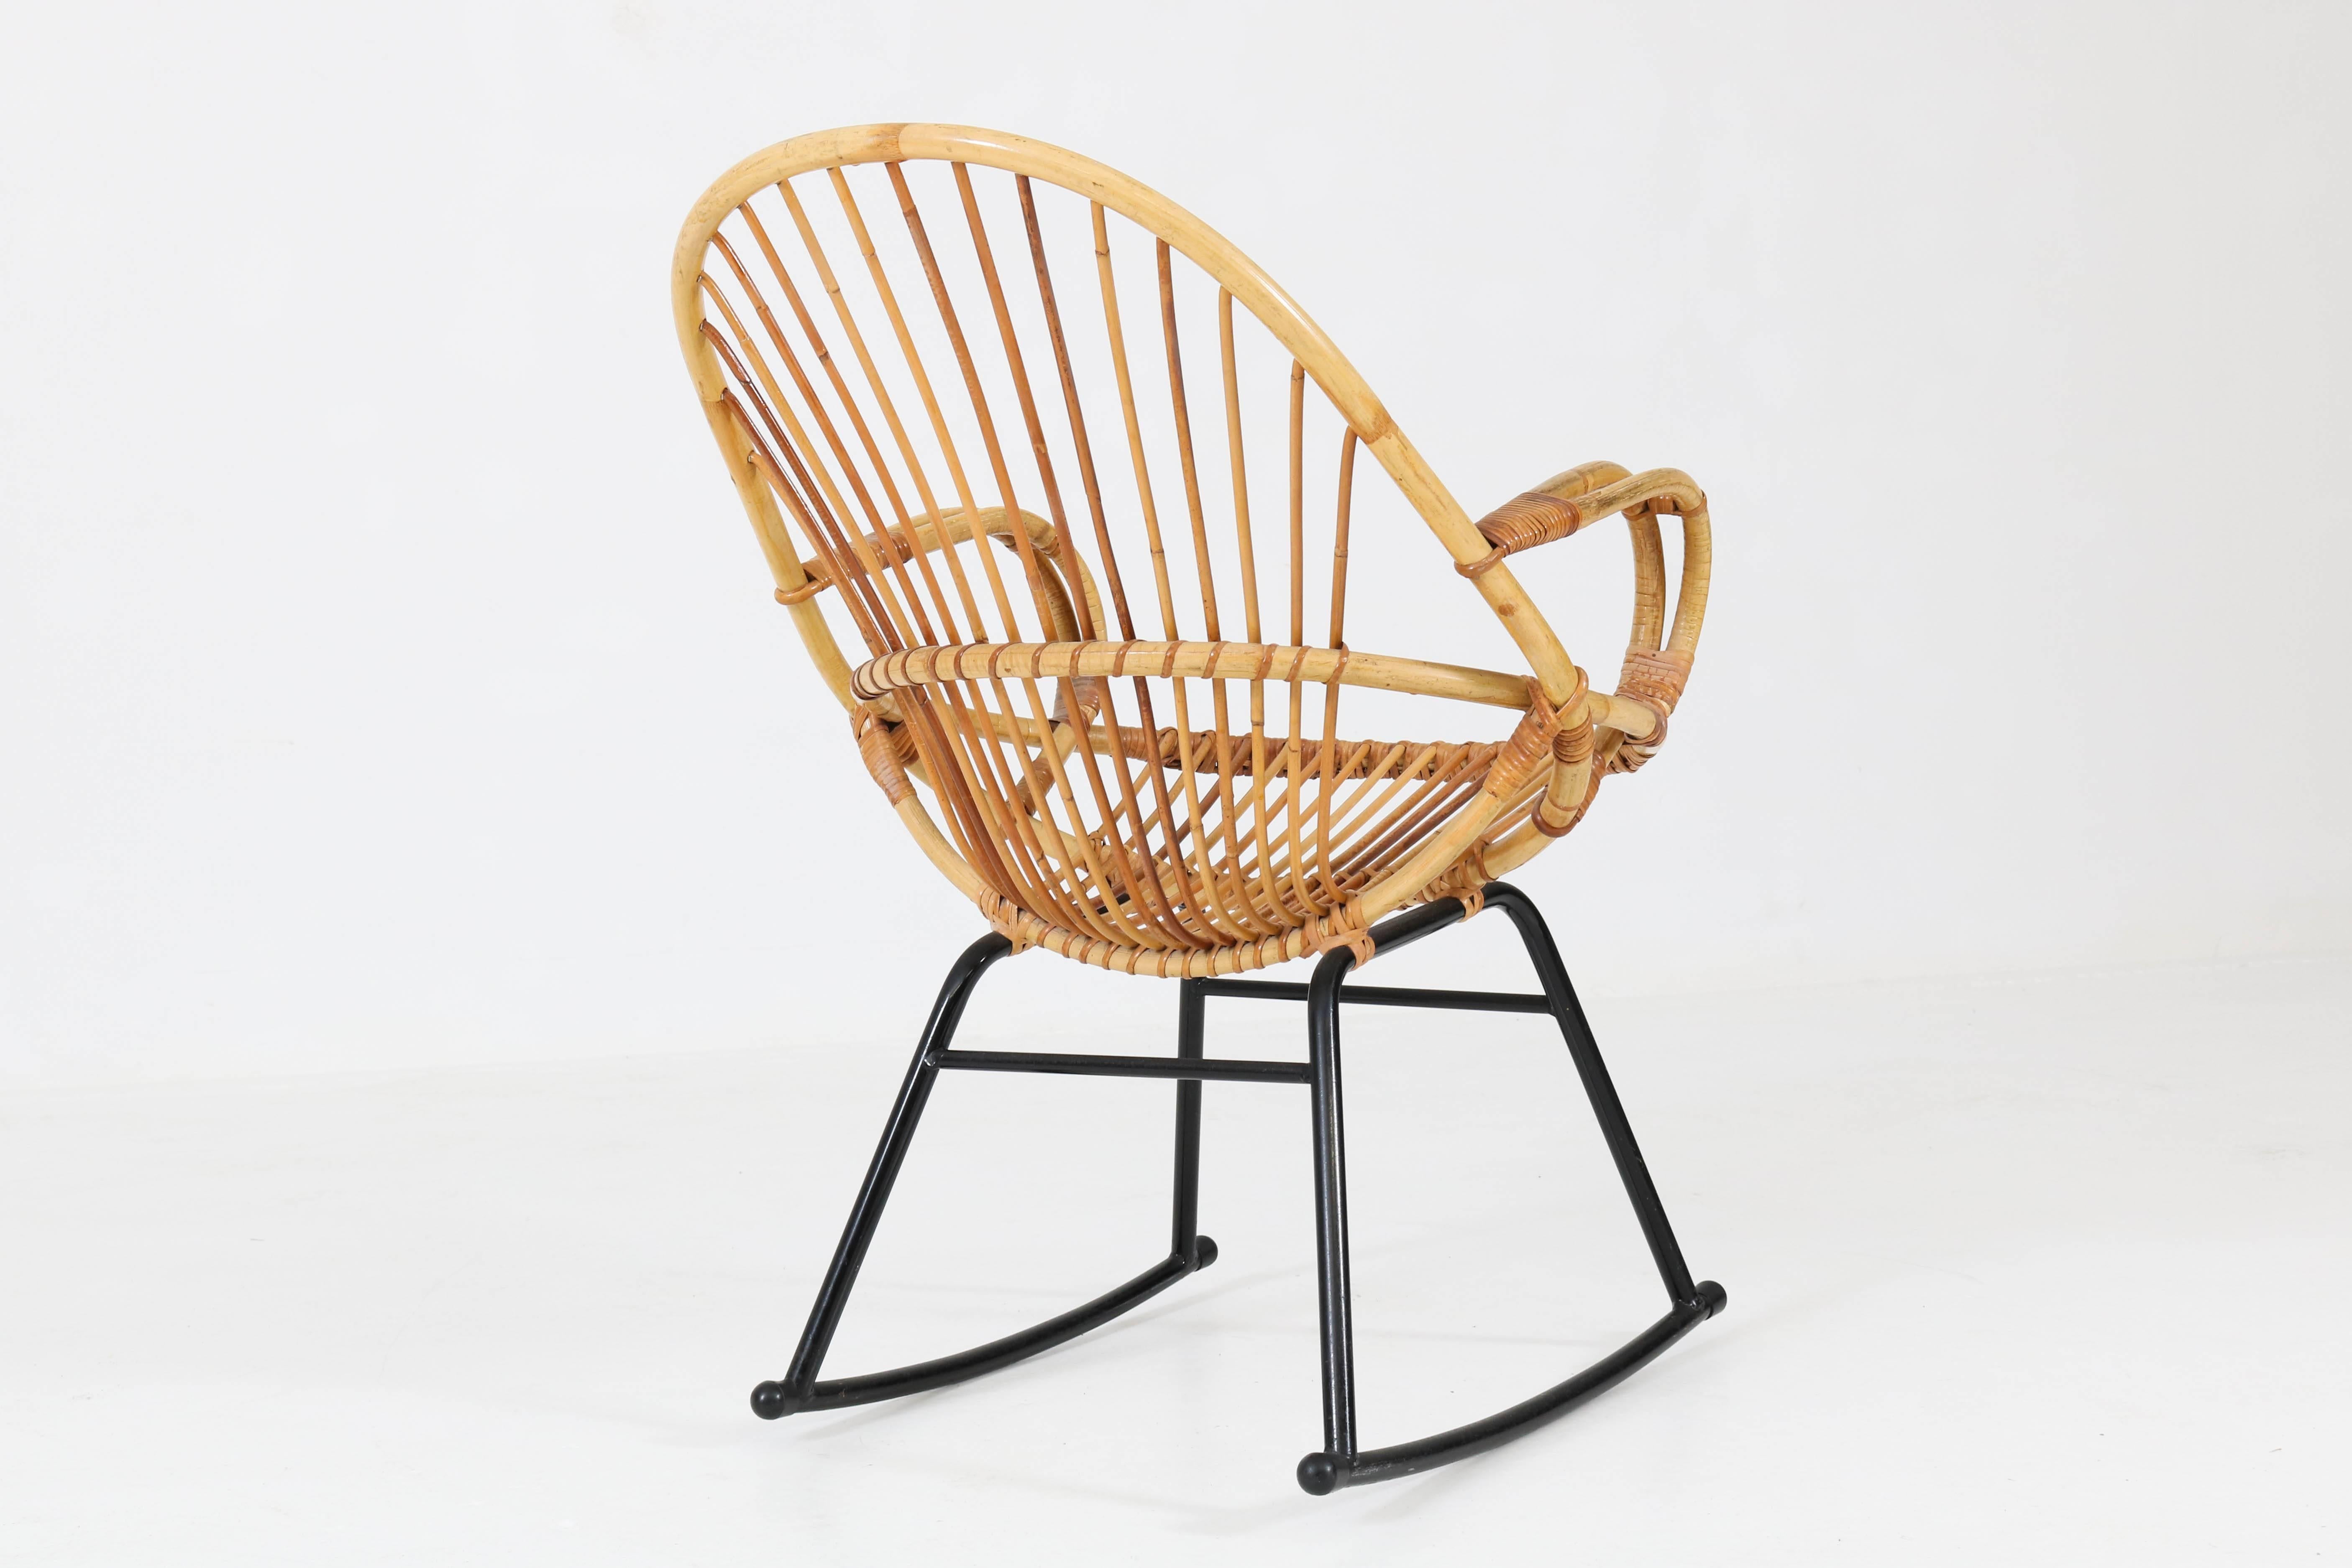 Mid-20th Century Mid-Century Modern Rattan Rocking Chair by Gebroeders Jonker for Rohe, 1960s